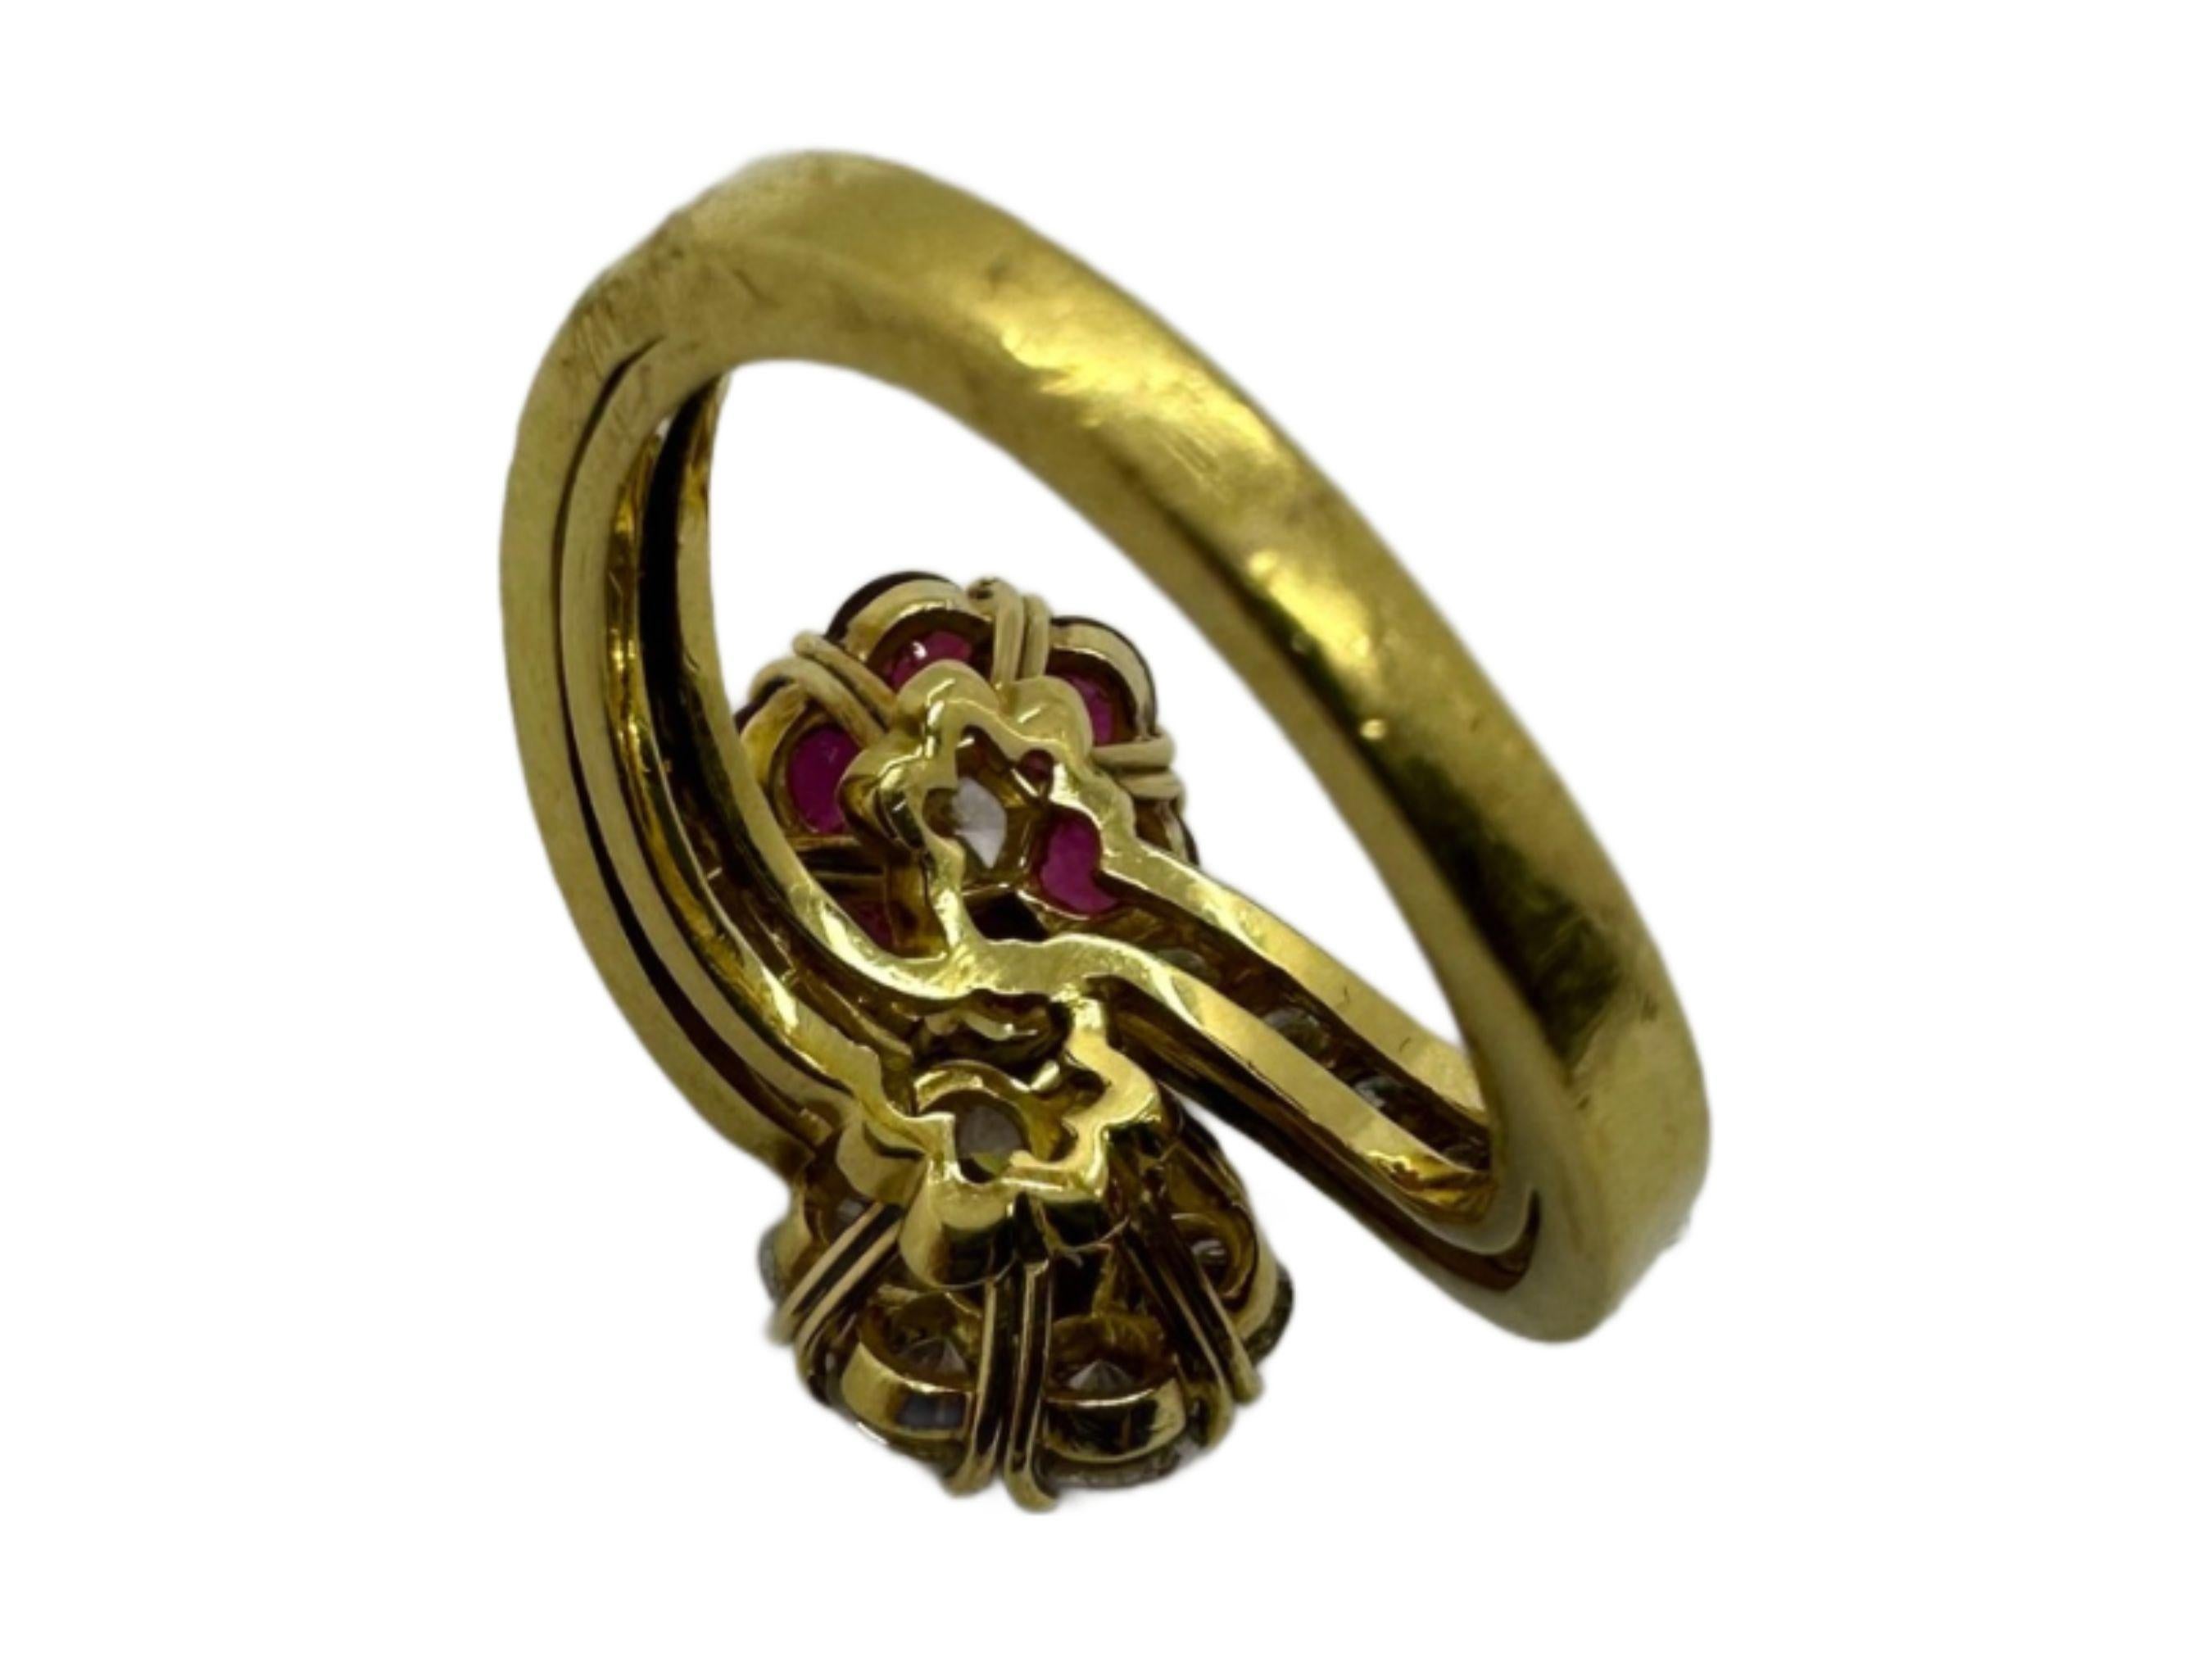 A true vintage treasure, this 18k yellow gold ring by Van Cleef & Arpels is a testament to timeless elegance. In very good vintage condition with minor surface wear consistent with its age, this piece showcases the impeccable craftsmanship of the